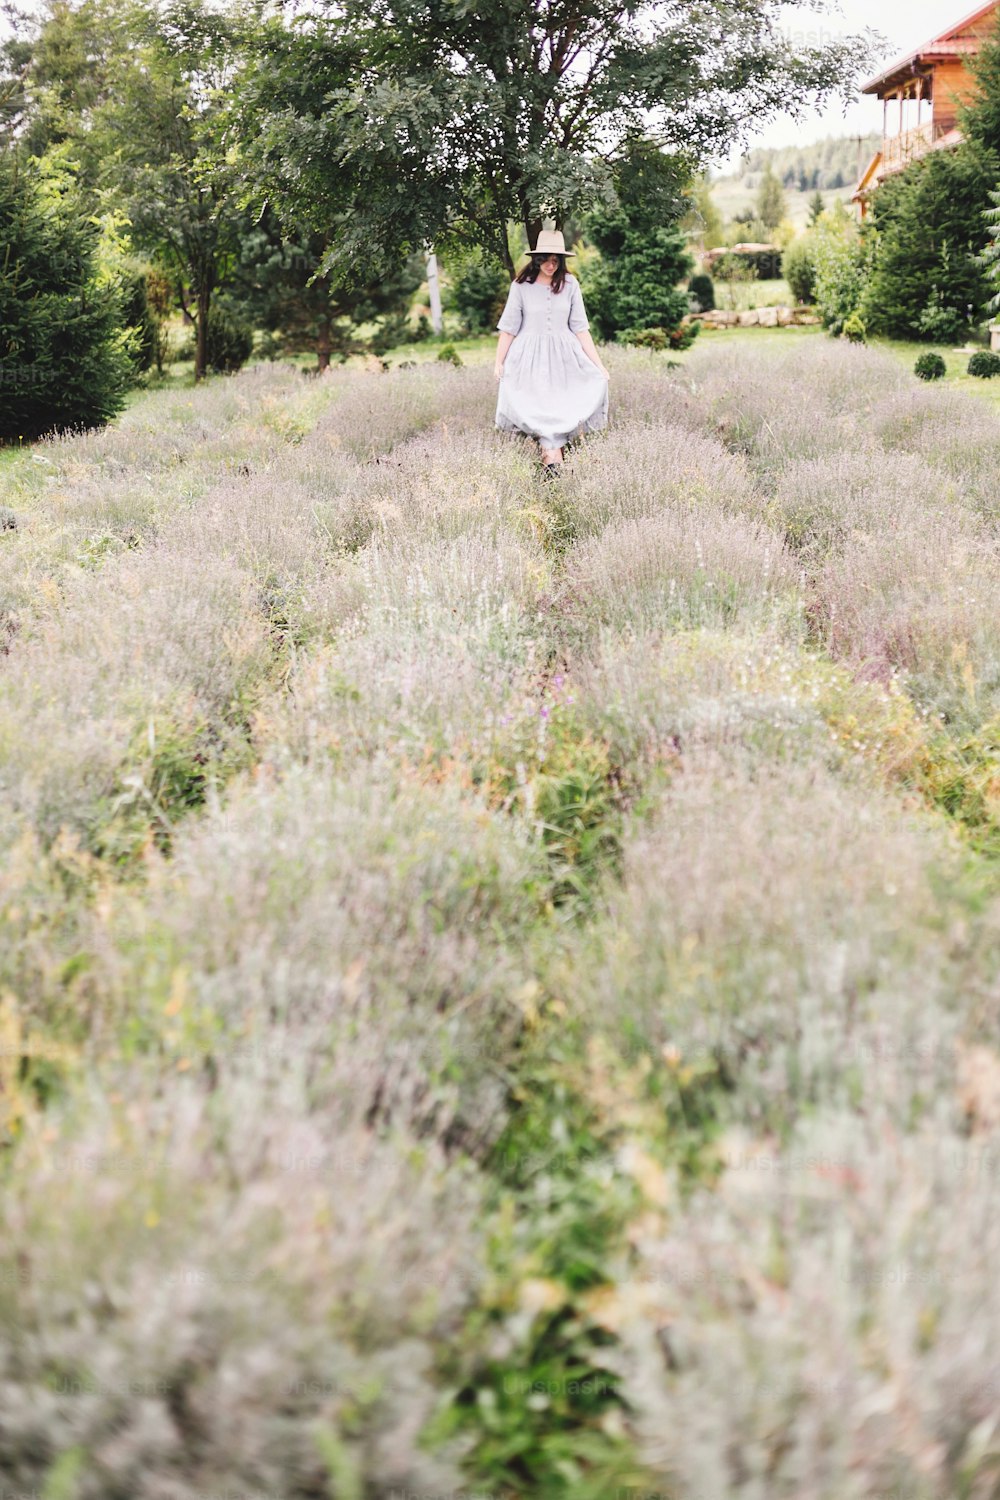 Stylish hipster girl in linen dress and hat walking in lavender field and relaxing. Happy bohemian woman enjoying lavender aroma in summer mountains. Atmospheric calm rural moment